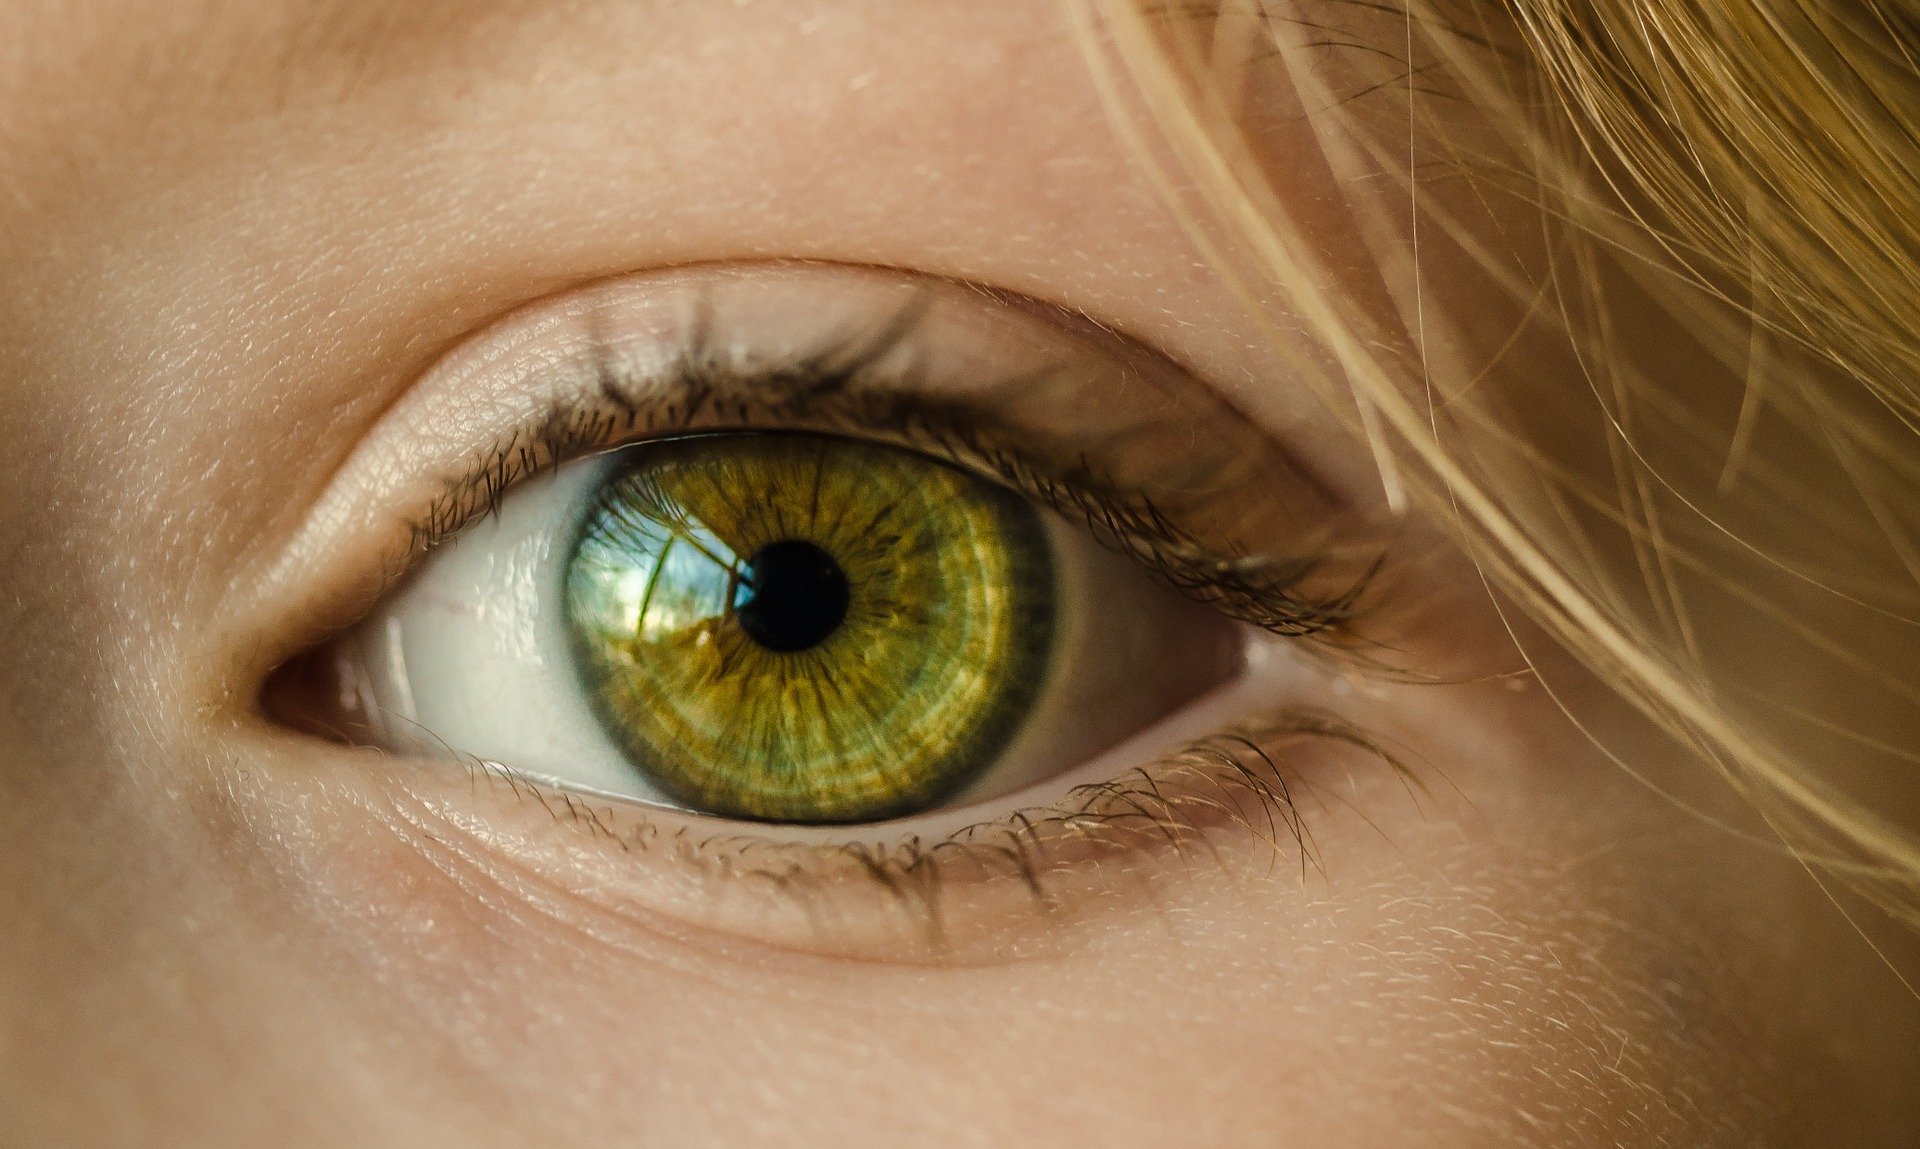 8 Vision-Enhancing Superfoods for Your Eyes